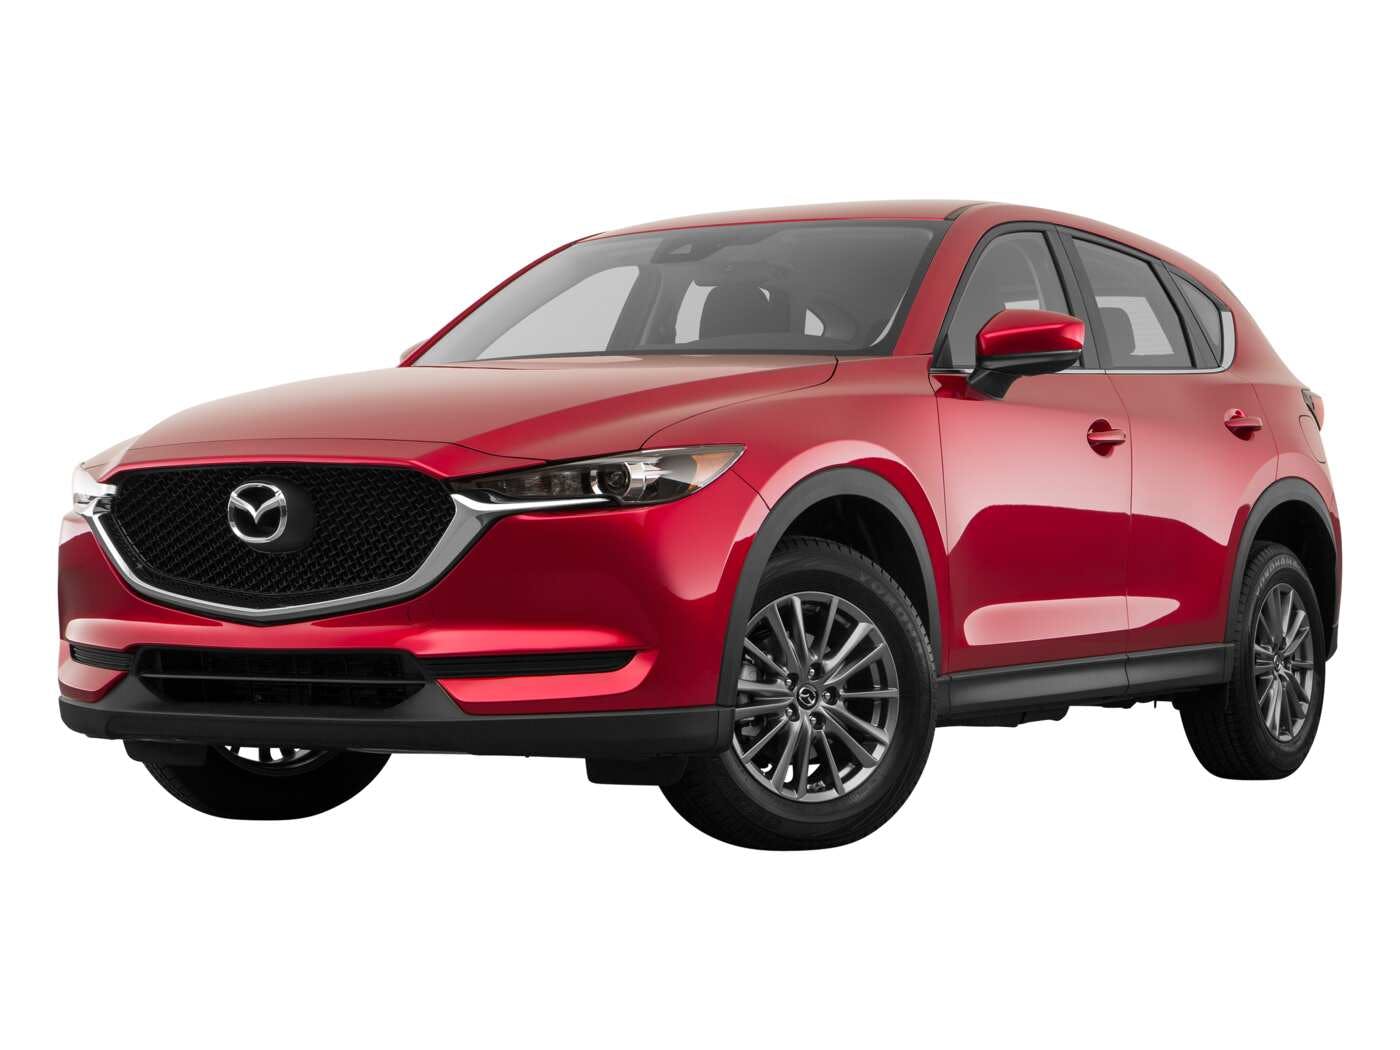 2020 Mazda CX-5 MPG Ratings  Fuel Economy by Engine, Trim Levels